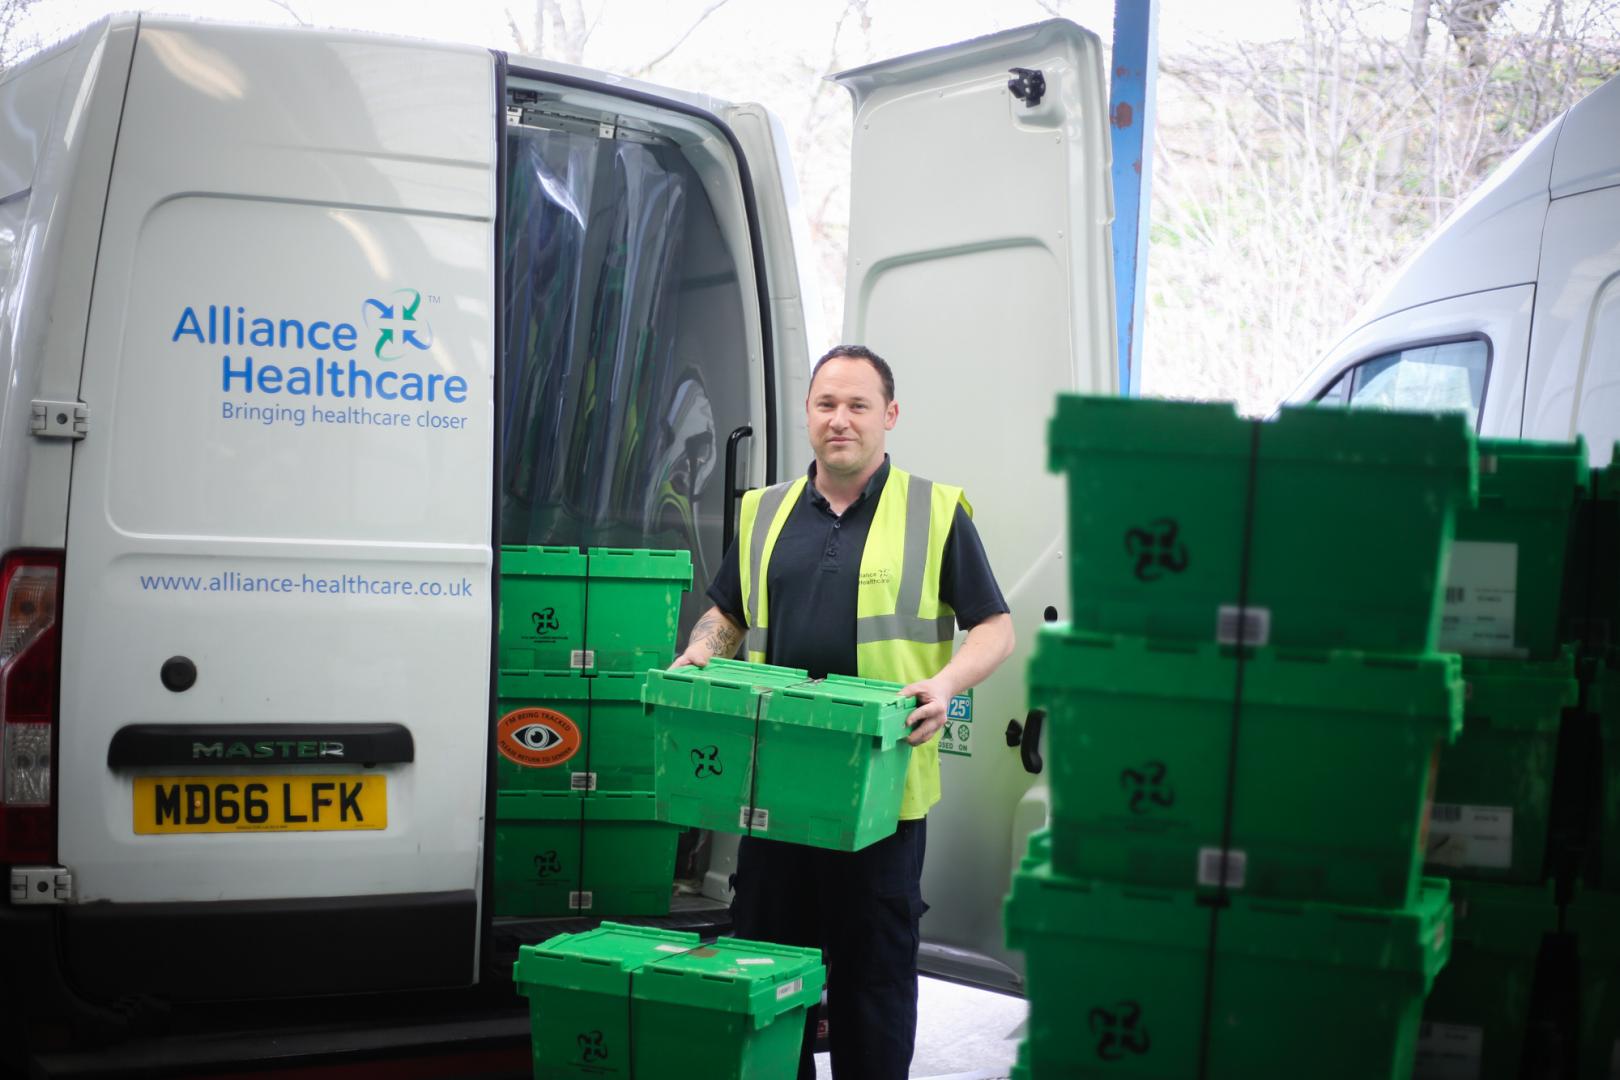 Man loading an Alliance Healthcare delivery van